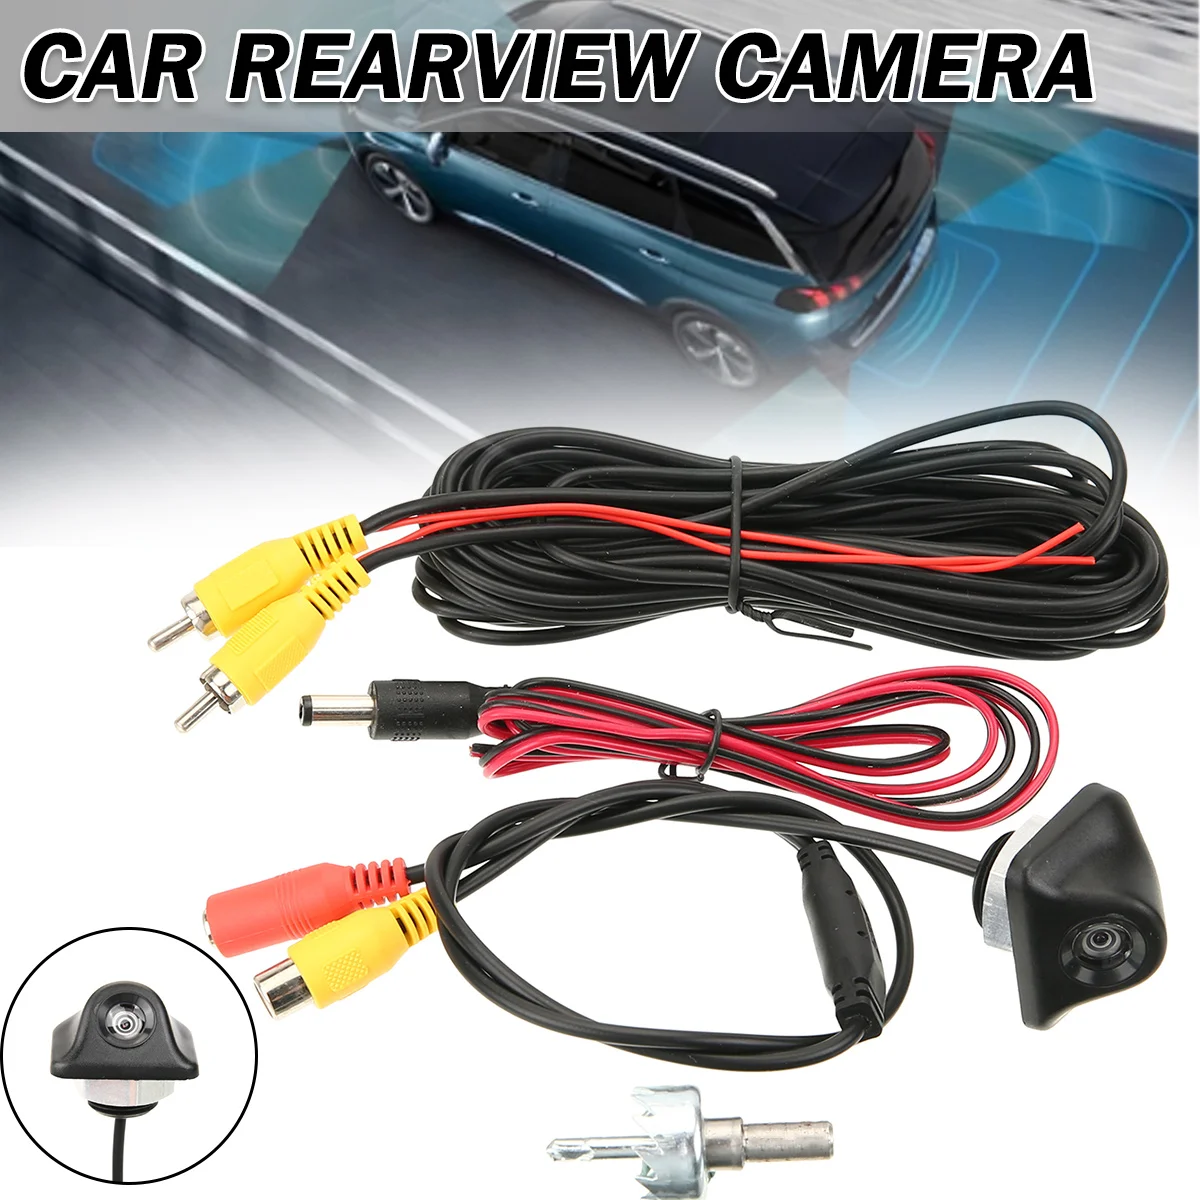 

New 1pc Car Reversing Rear View Camera Durable Waterproof 170 Degrees Vehicle Mounted Parking Backup Cam For Cars Trucks RV